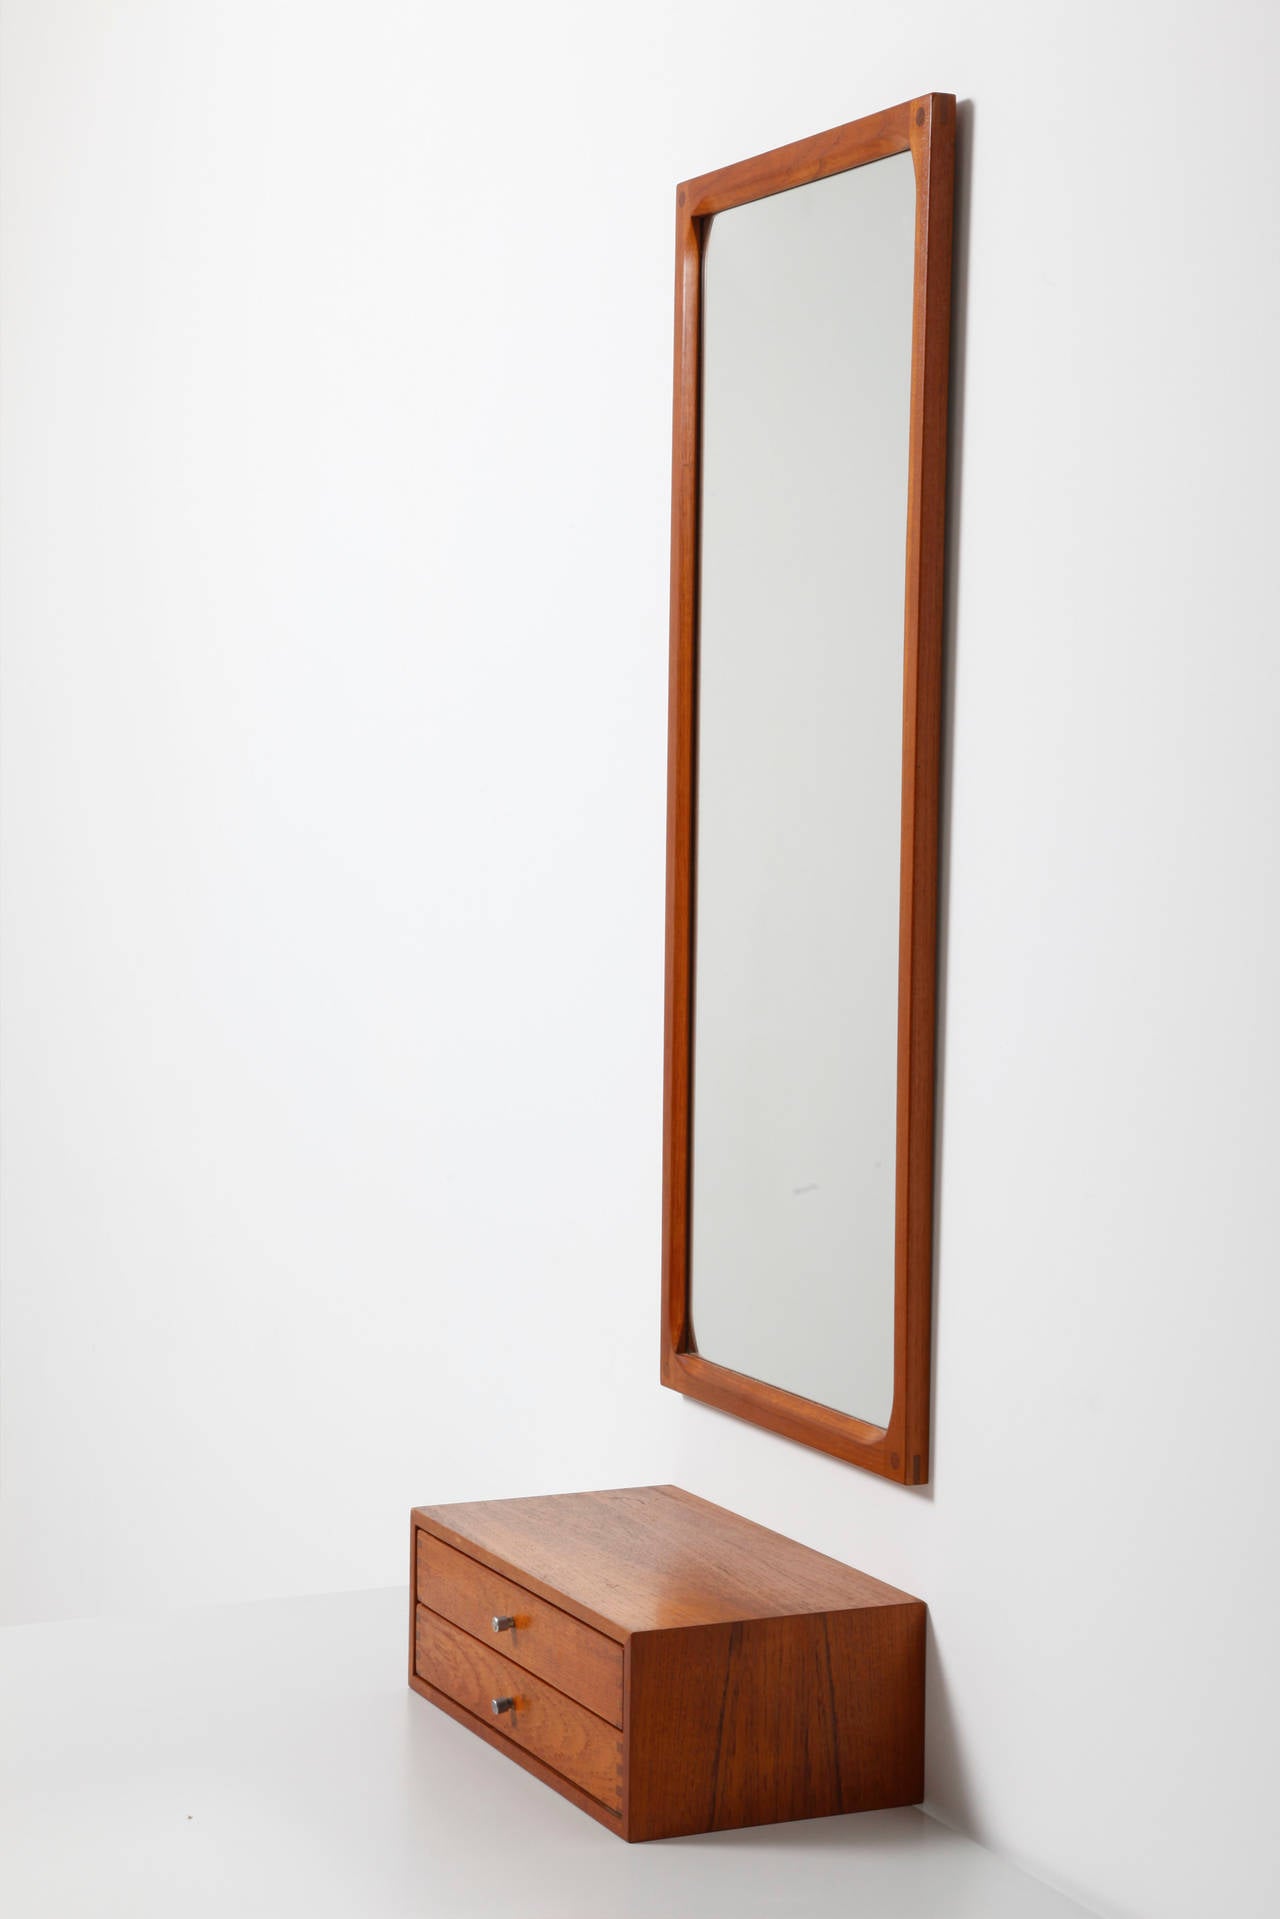 Set of wall console and mirror designed by Aksel Kjersgaard for Odder, Denmark.
Mirror in teakwood, model 145.
Size: W 41cm, H 104 cm, D 3cm. Console teak: W 41cm, H 25cm, D 25cm. Stamped.